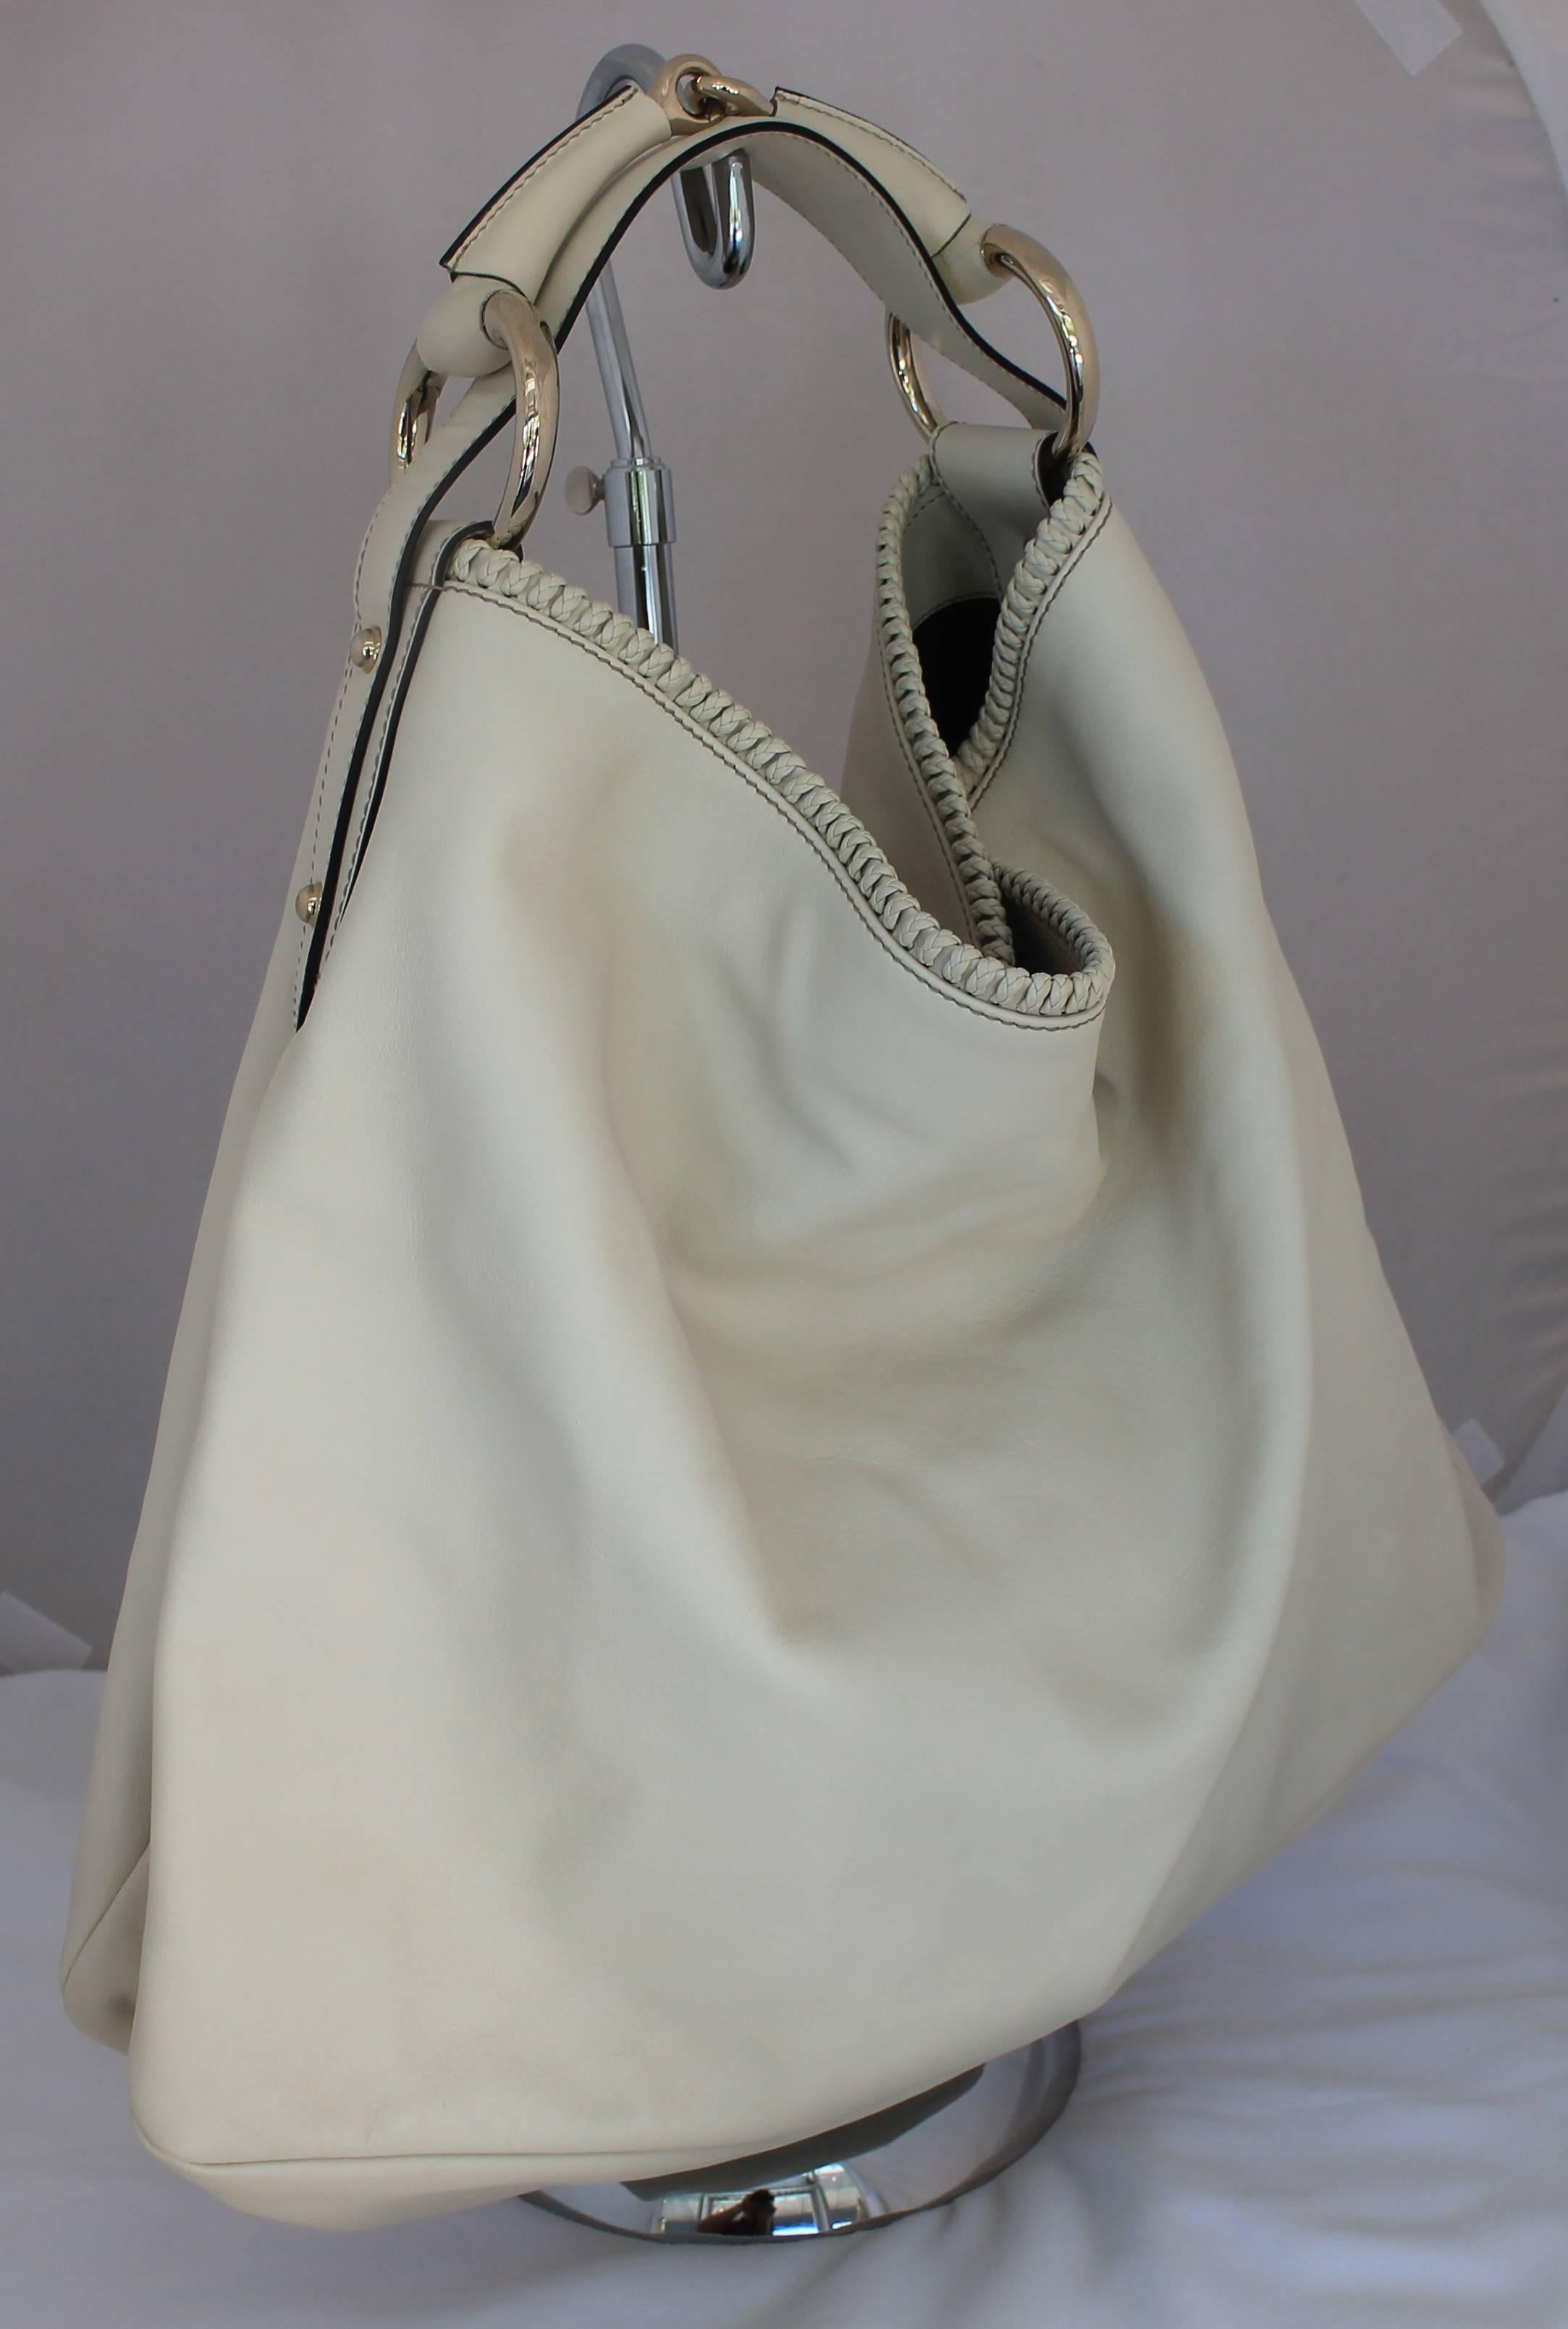 Gucci Bone Large Horsebit Hobo Handbag - GHW  This bag is in excellent condition, hardly carried. The inside of the bag has one large main compartment, with 1 large zip pocket.
Measurements:
Height 15